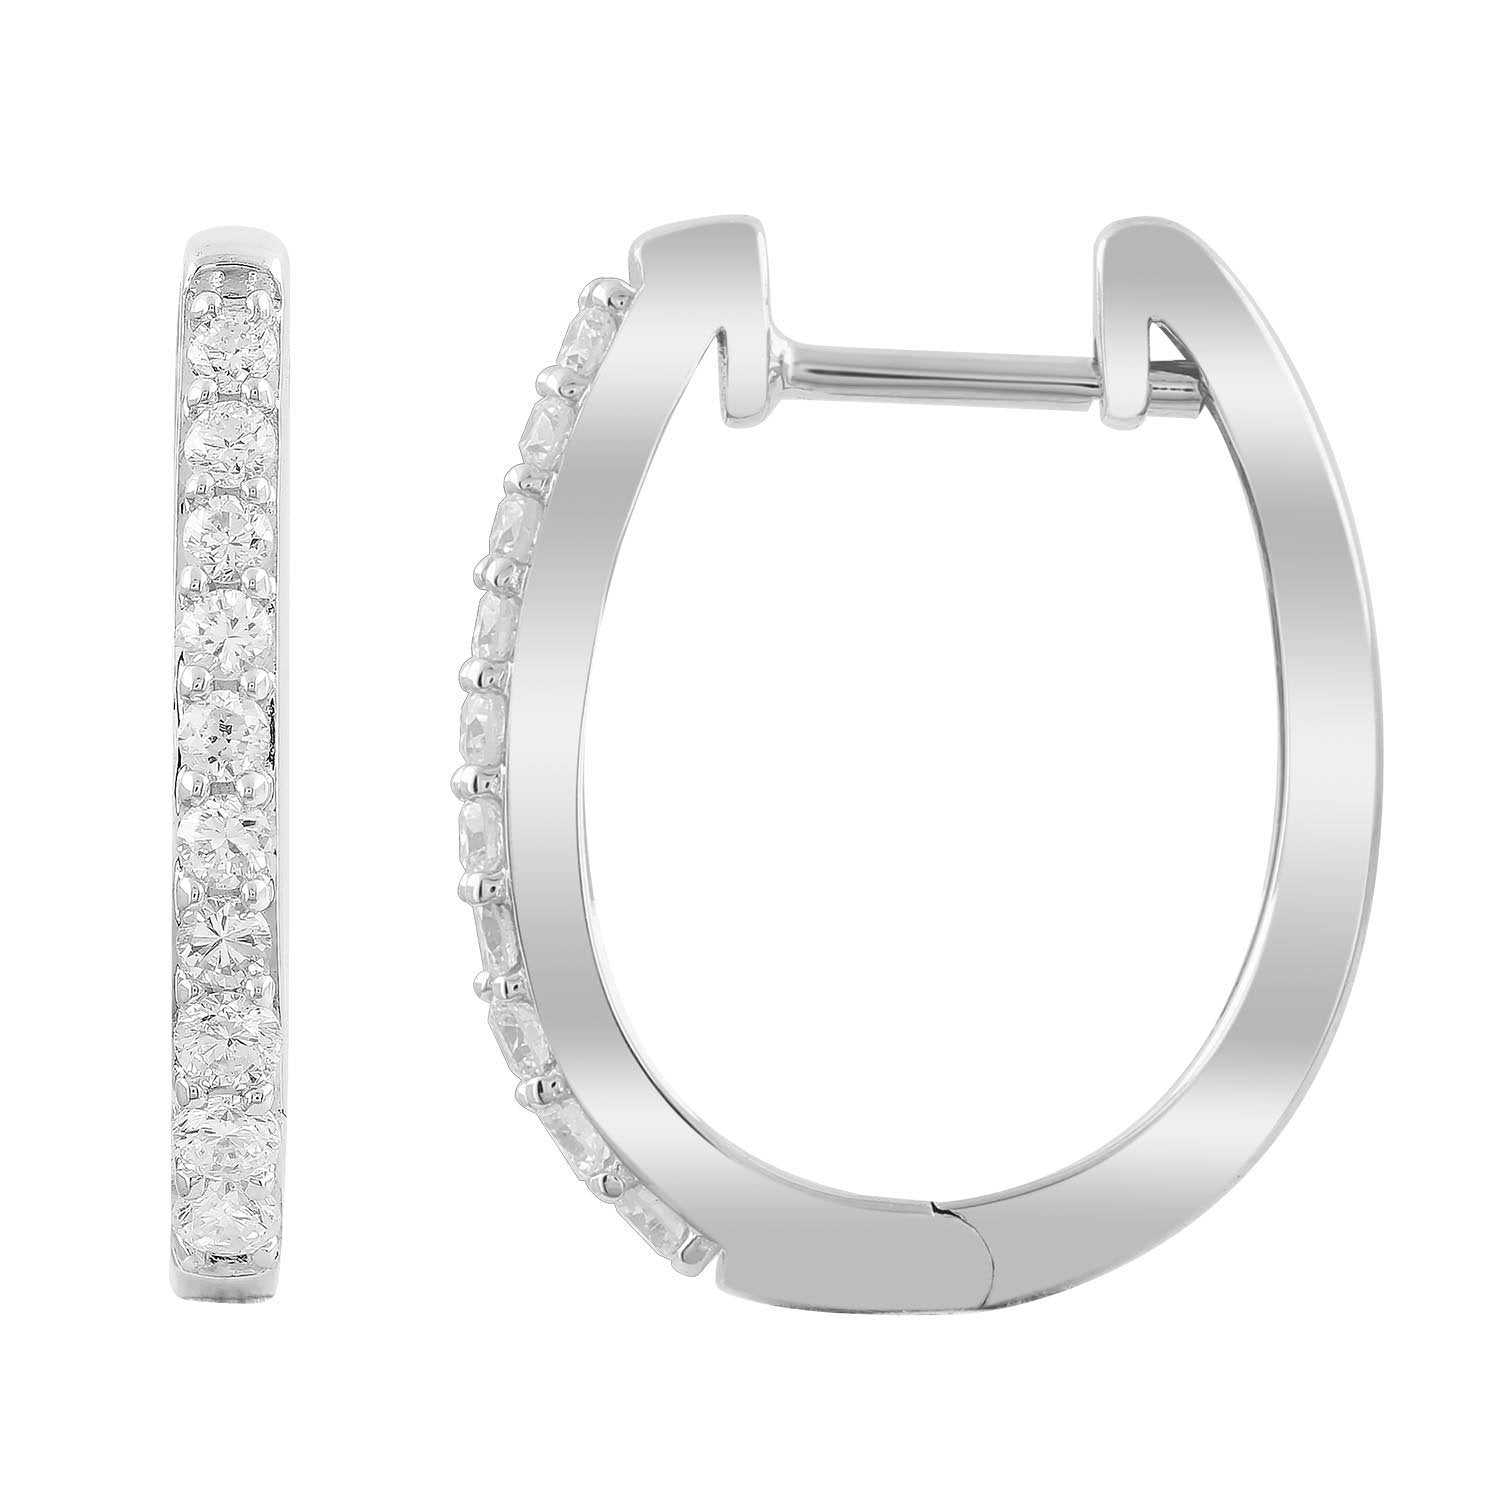 Huggie Earrings with 0.33ct Diamonds in 9K White Gold